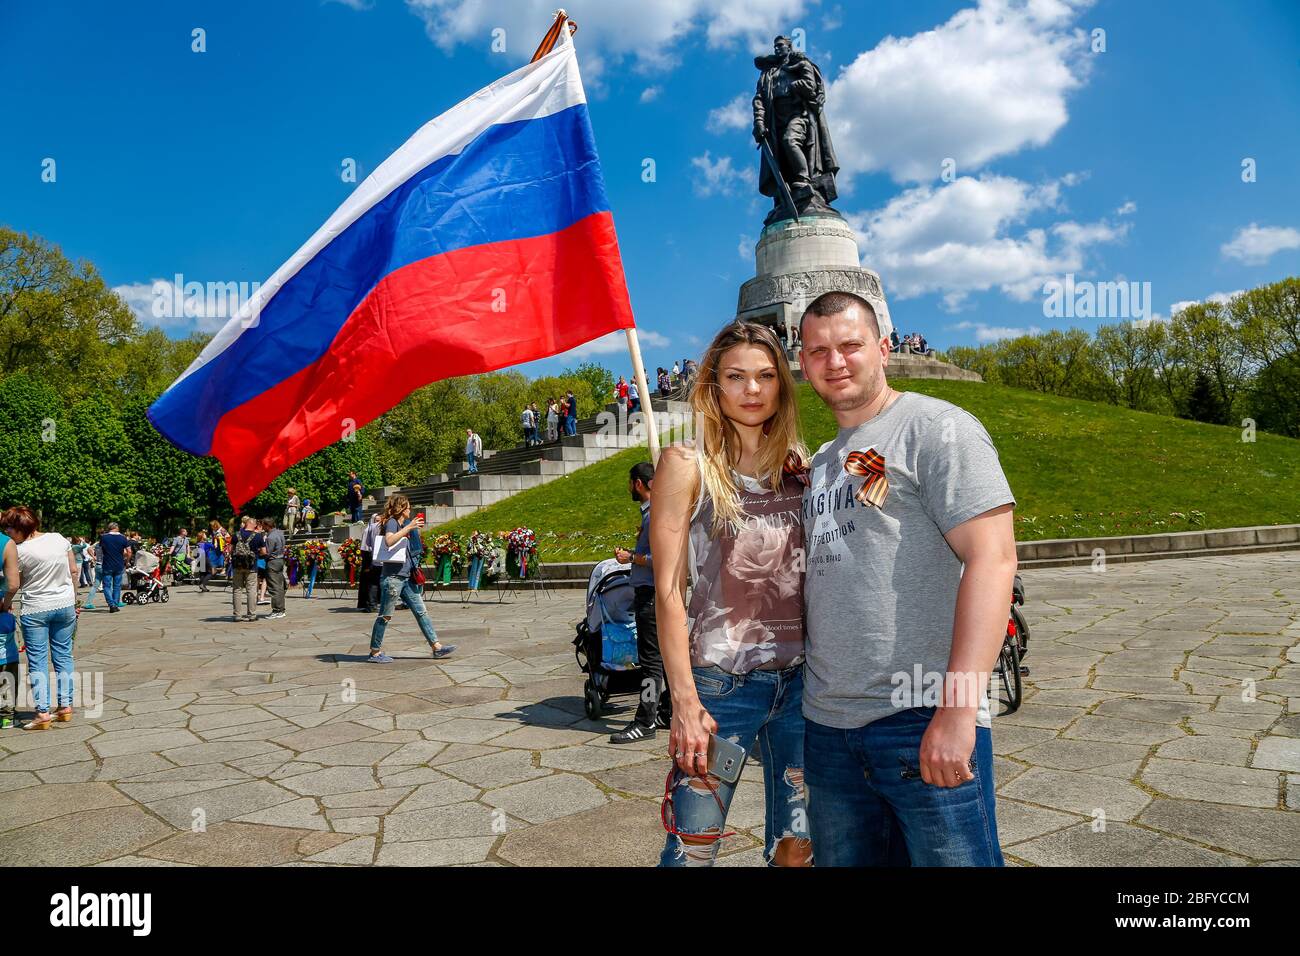 May 9, 2016, Berlin, at the Soviet War Memorial in Treptower Park (Treptower War Memorial), a memorial and at the same time a military cemetery, numerous Russians and German-Russians with many colorful flags commemorate the 71st day of victory at the end of the Second World War. The memorial was erected in Germany in 1949 on the instructions of the Soviet military administration to honor the soldiers of the Red Army who died in World War II. Over 7000 of the soldiers who died in the Schlaughs around Berlin are buried here. A couple poses with the Russian flag. | usage worldwide Stock Photo